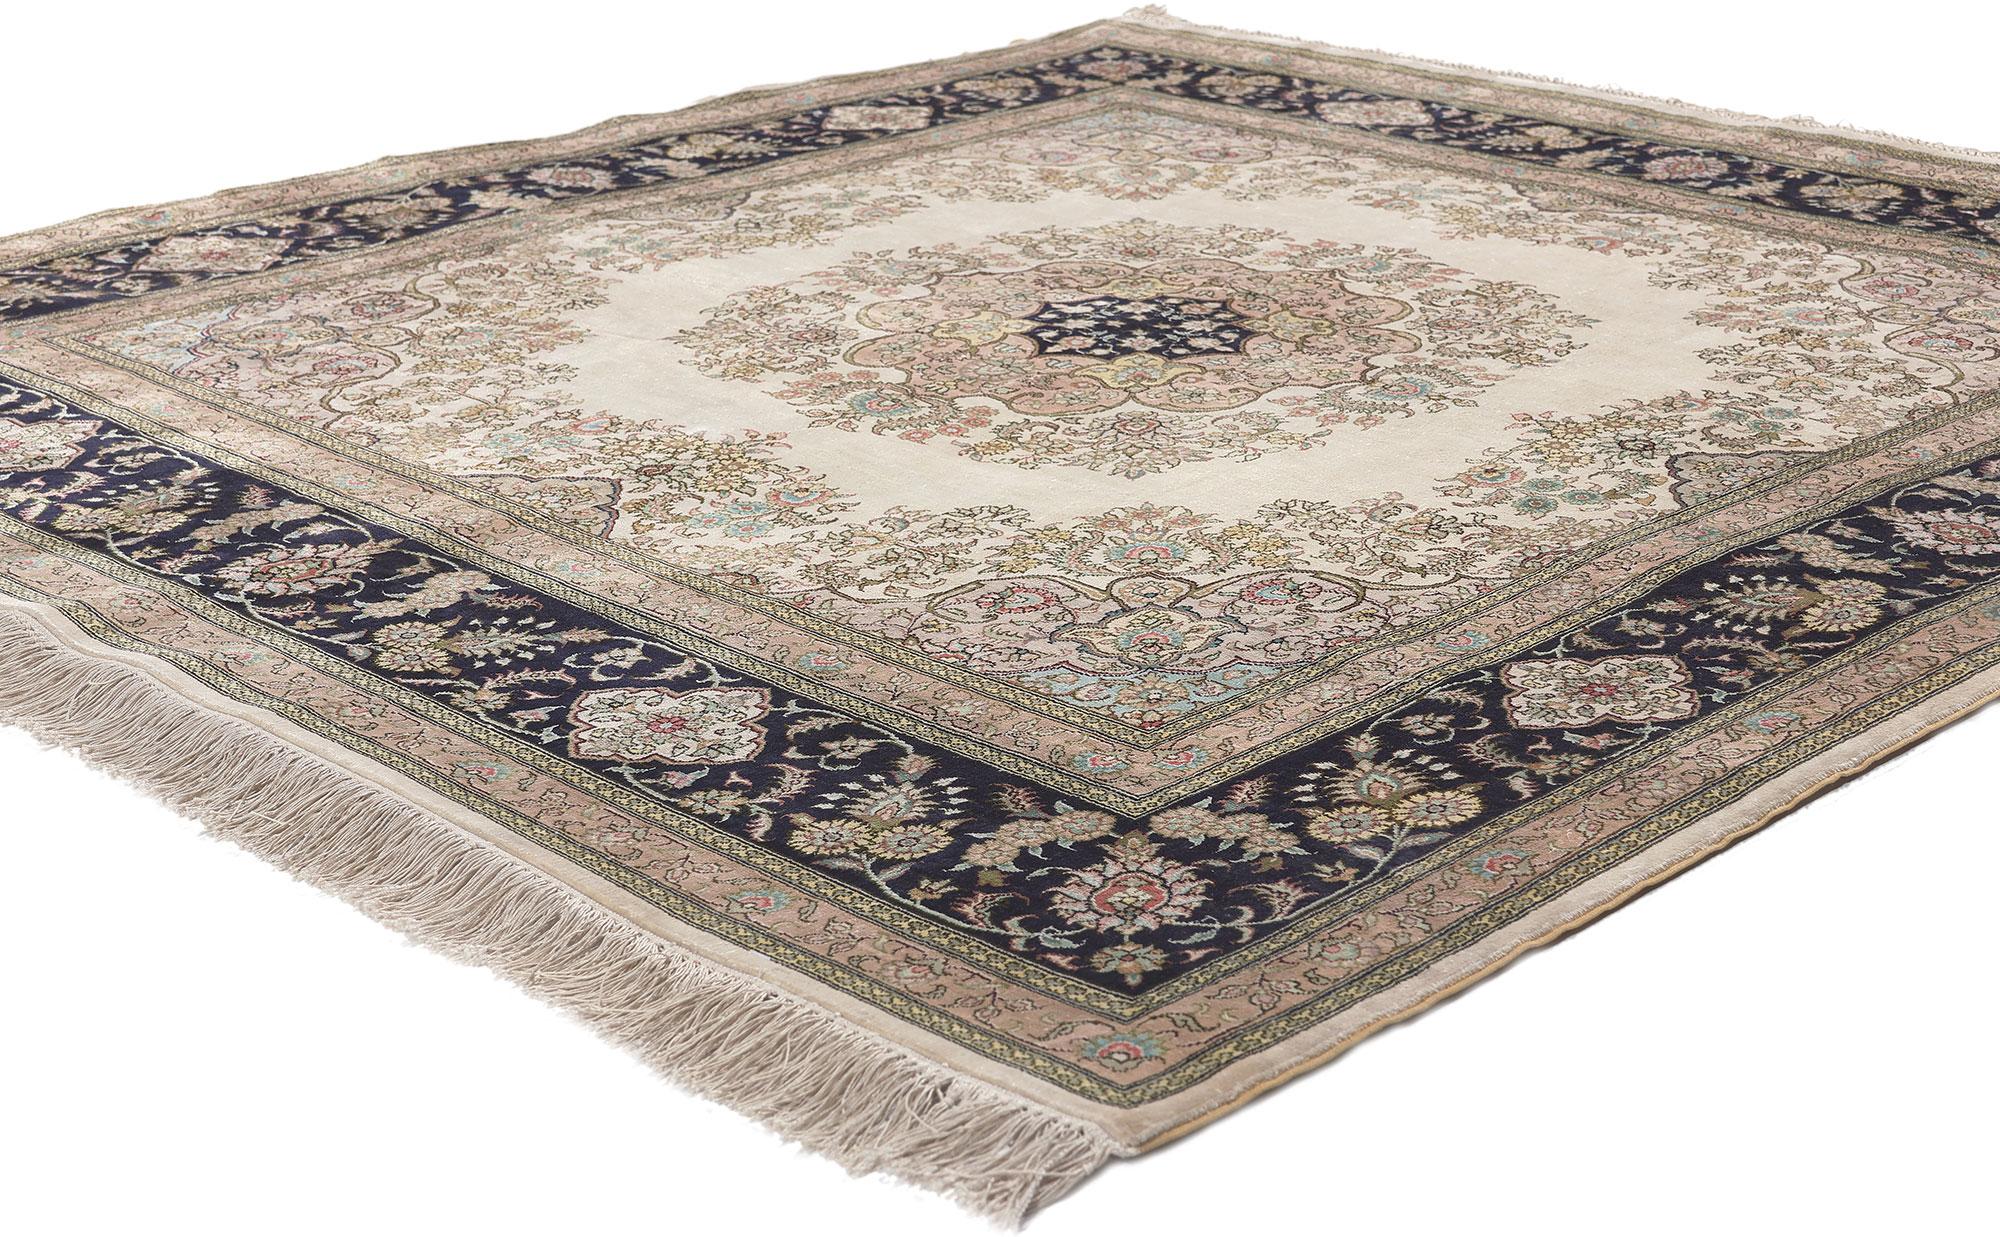 78622 Vintage Turkish Kayseri Rug, 04'10 x 05'02. 
Emulating timeless style with incredible detail and texture, this silk on silk vintage Turkish Kayseri rug is a captivating vision of woven beauty. The decadent floral design and soft earthy